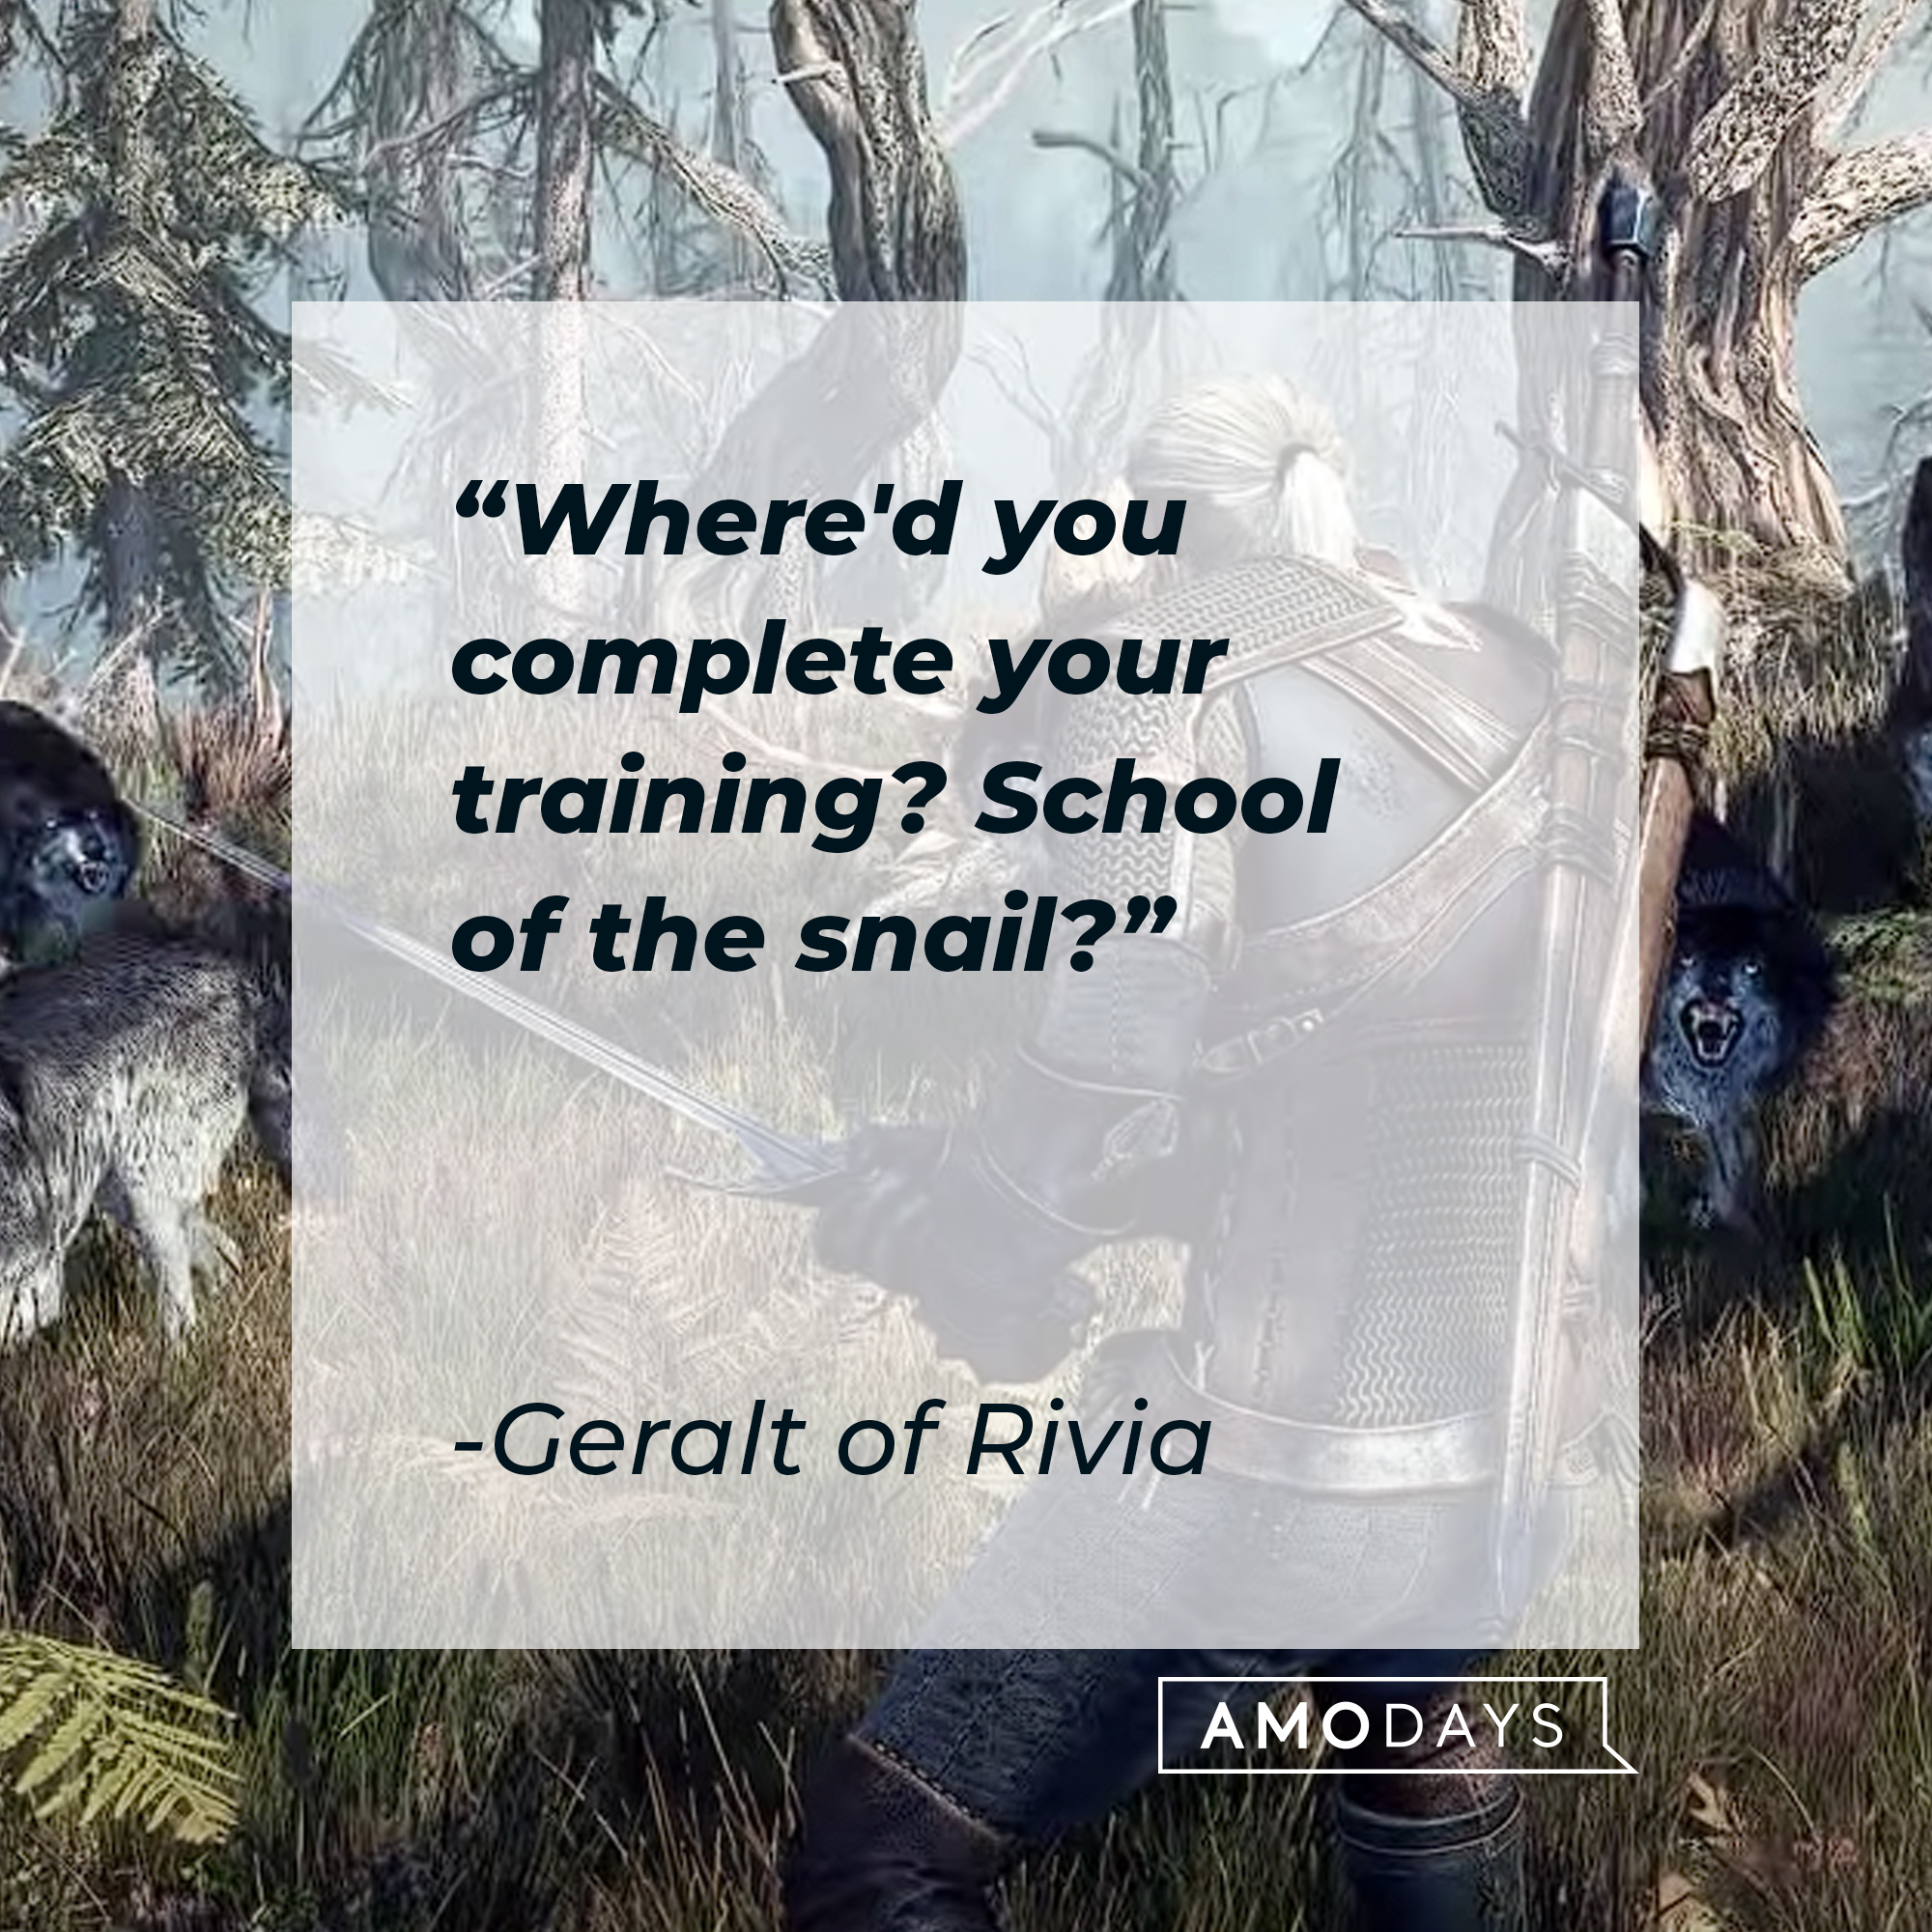 Geralt of Rivia from the video game with his quote: "Where'd you complete your training? School of the snail?" | Source: youtube.com/thewitcher